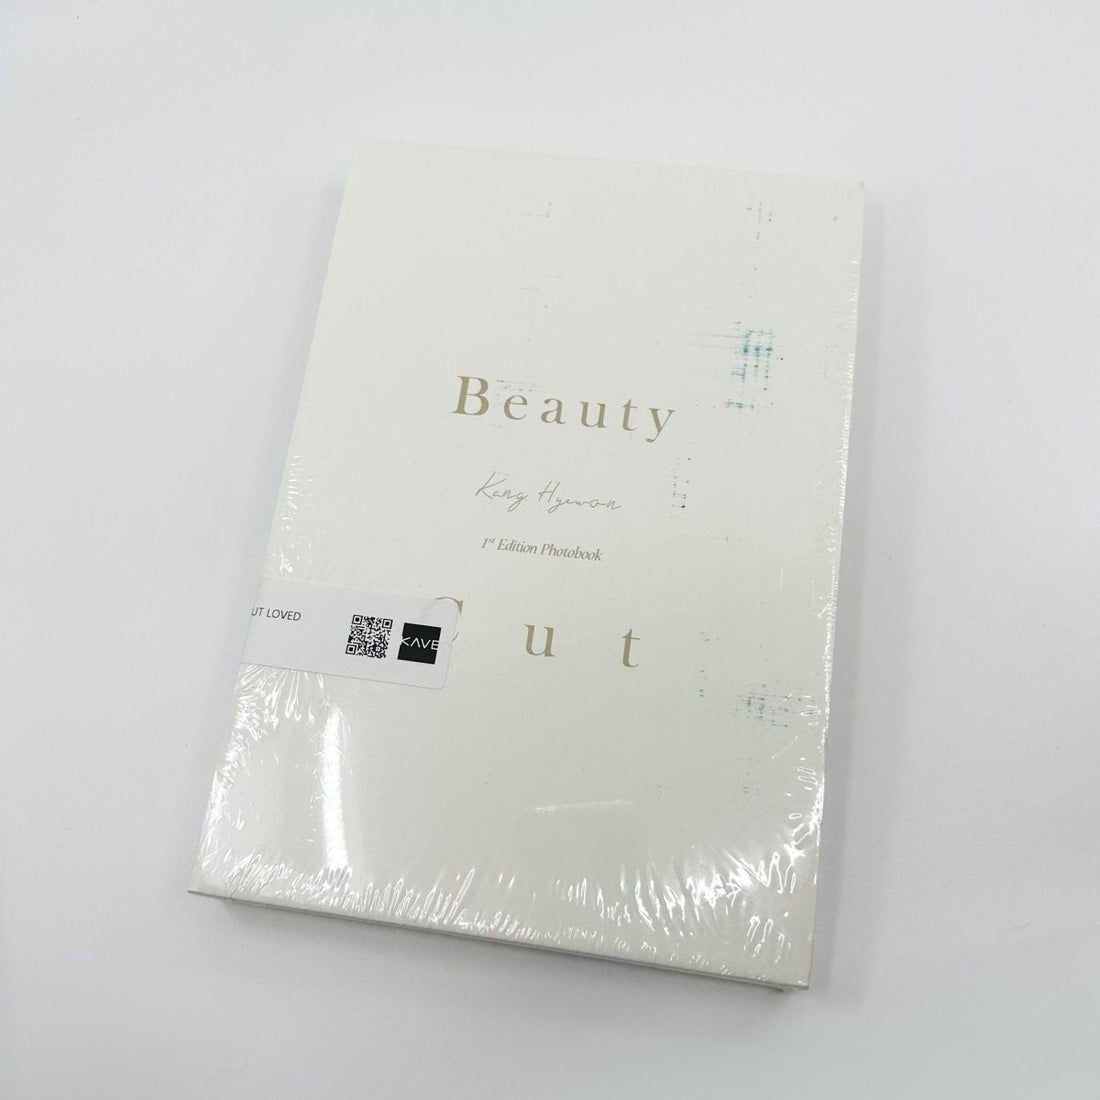 KANG HYEWON - 1st Edition Photobook [Beauty Cut] FLAWED B - KAVE SQUARE